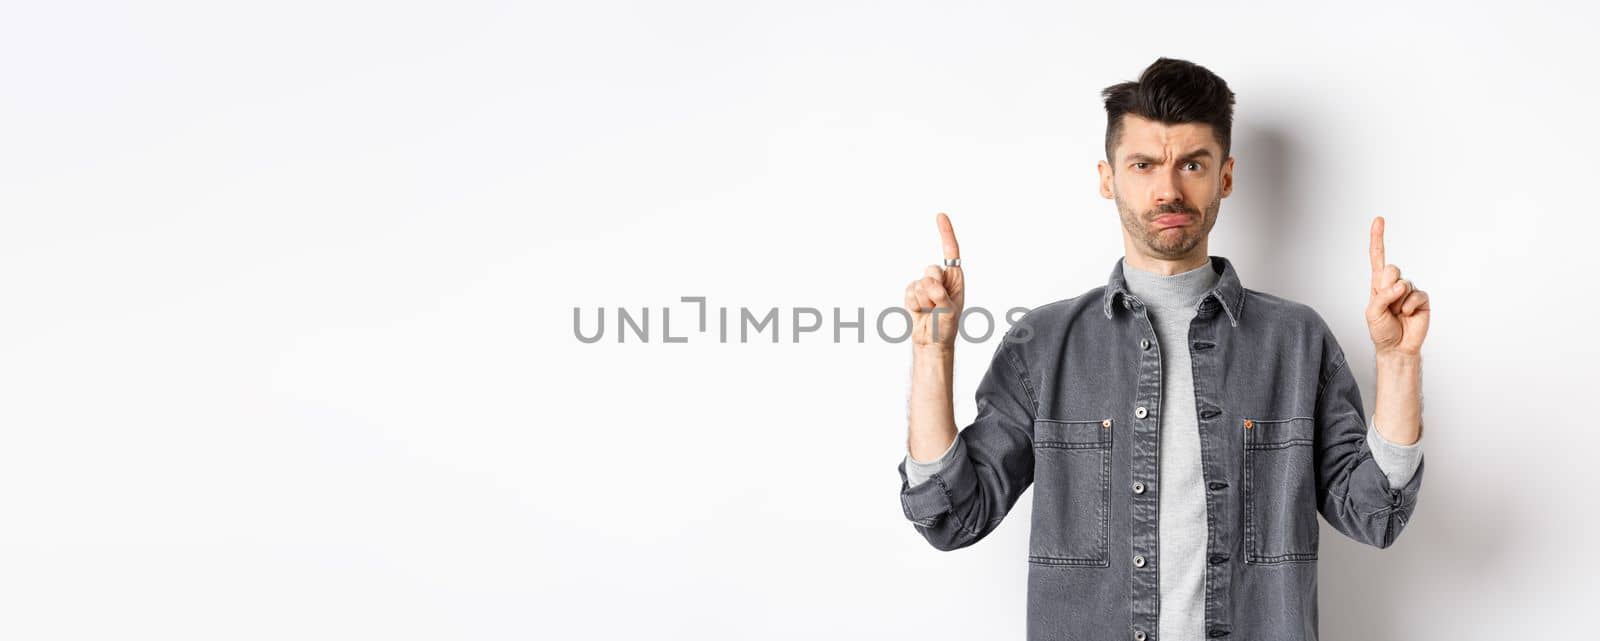 Confused funny guy with moustache pointing fingers up at something strange, frowning and pouting puzzled, standing on white background by Benzoix